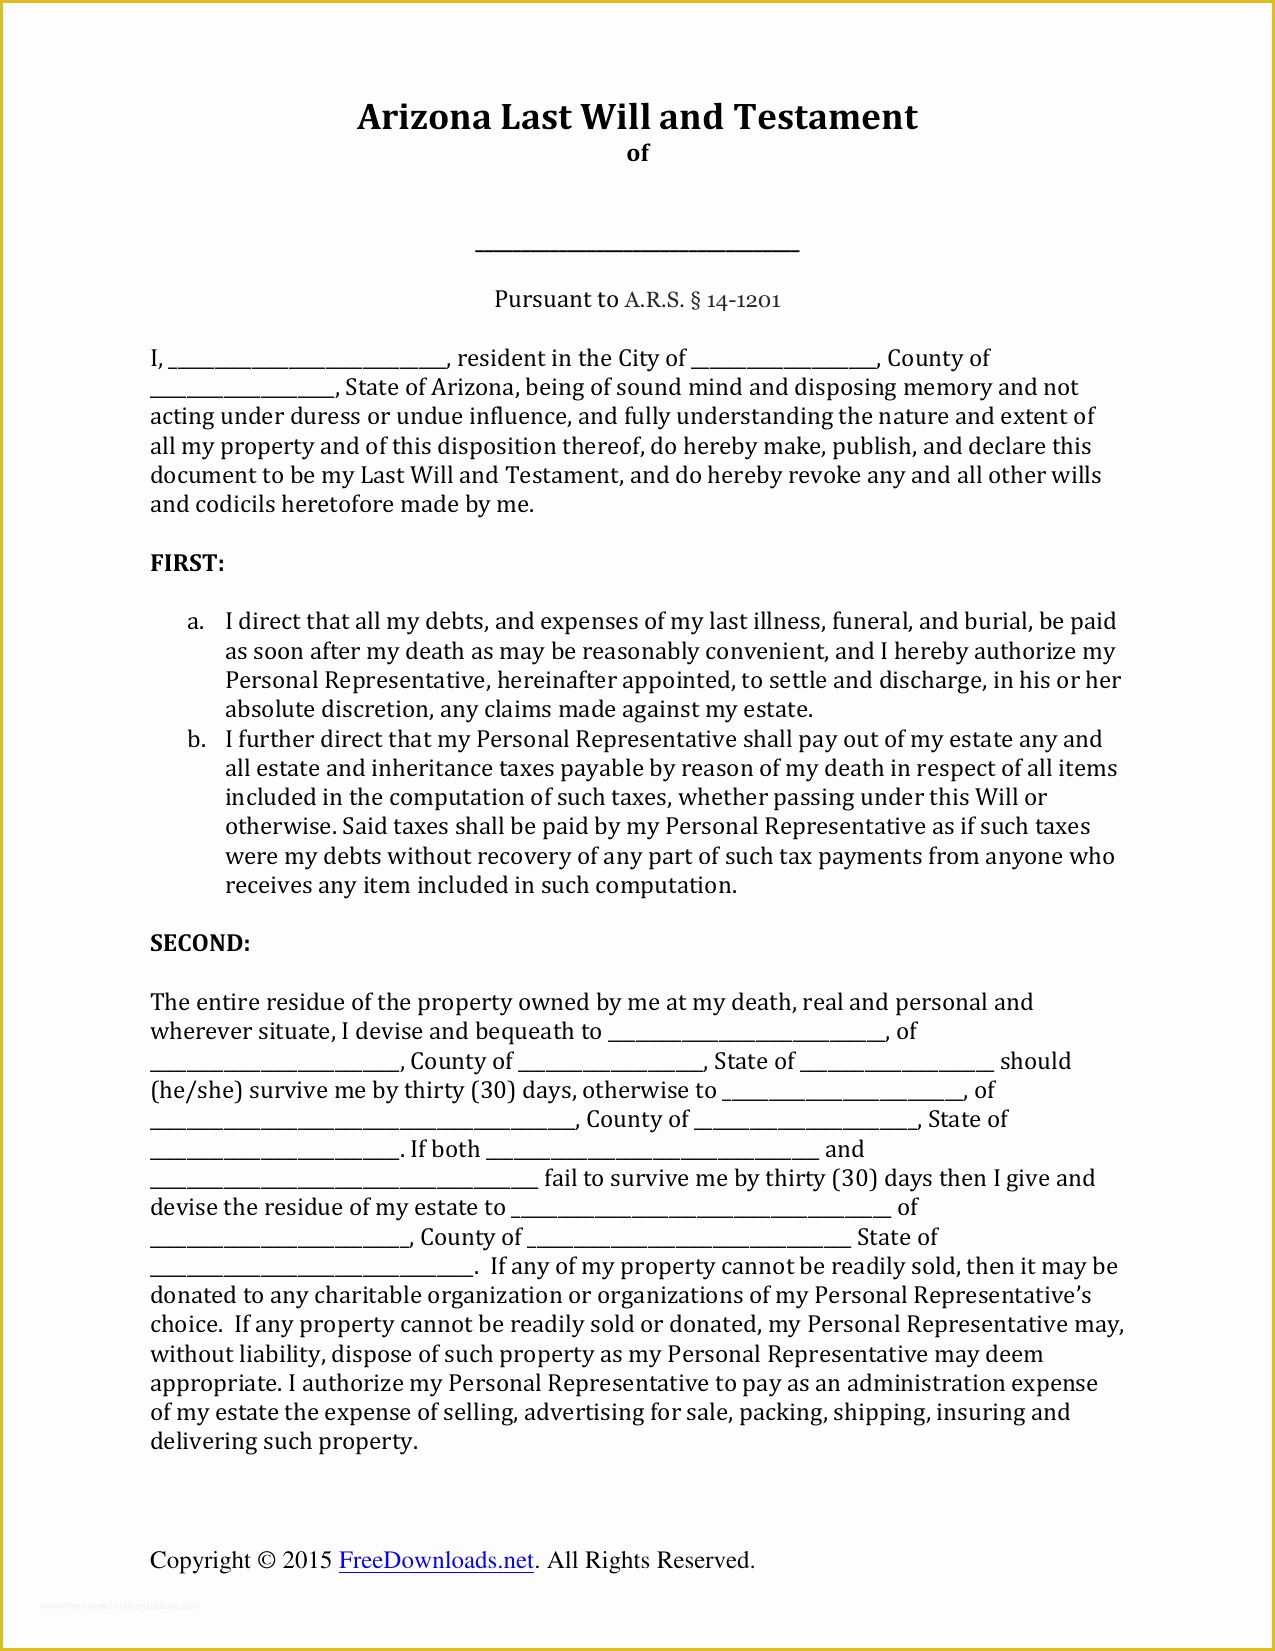 Virginia Last Will and Testament Free Template Of Download Arizona Last Will and Testament form Pdf